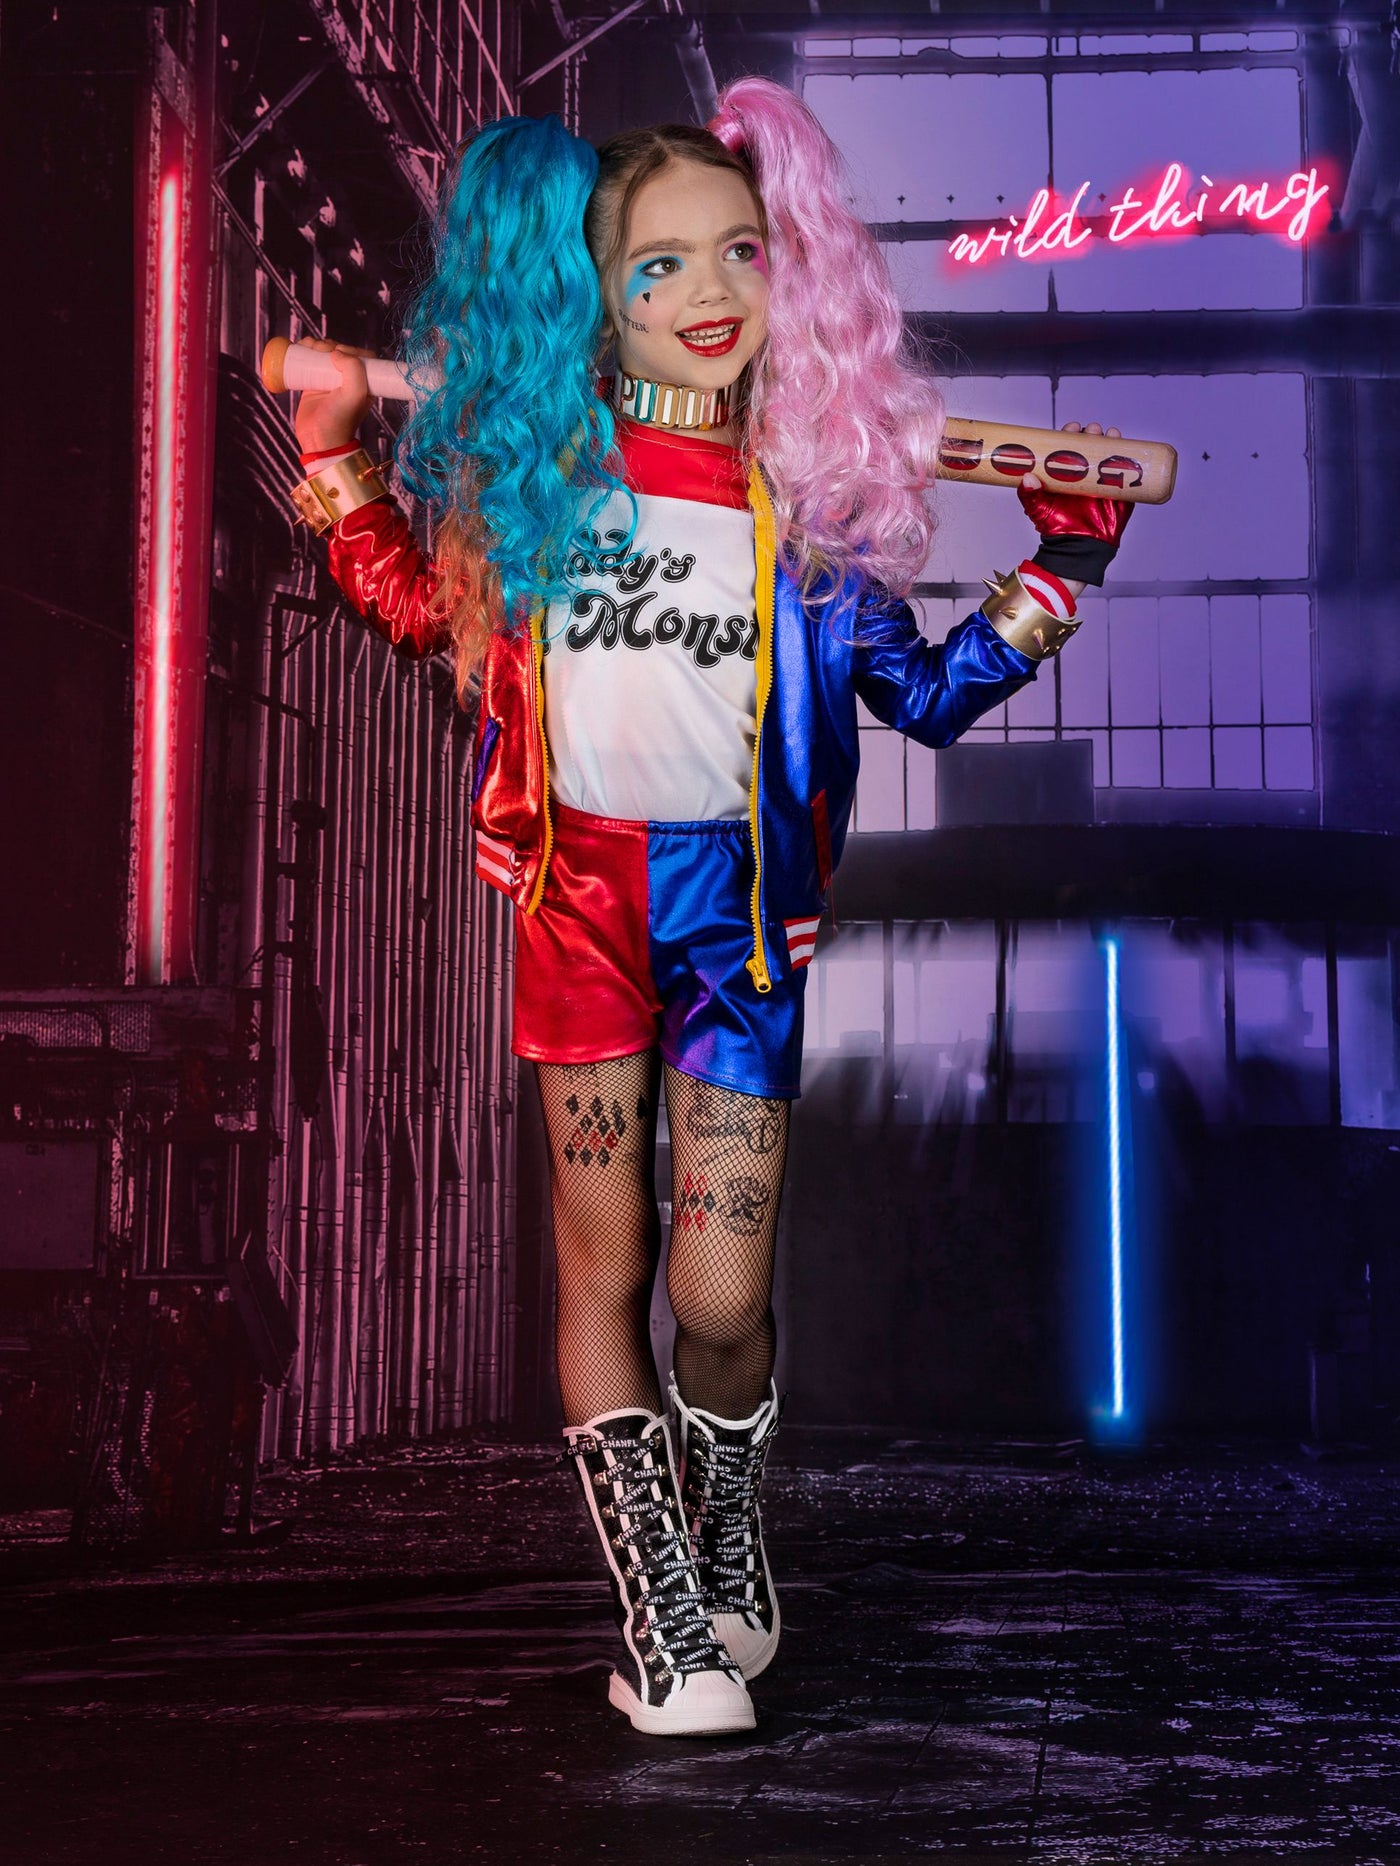 Harley Quinn Halloween Costume Ideas 2022: 'Suicide Squad' Outfit